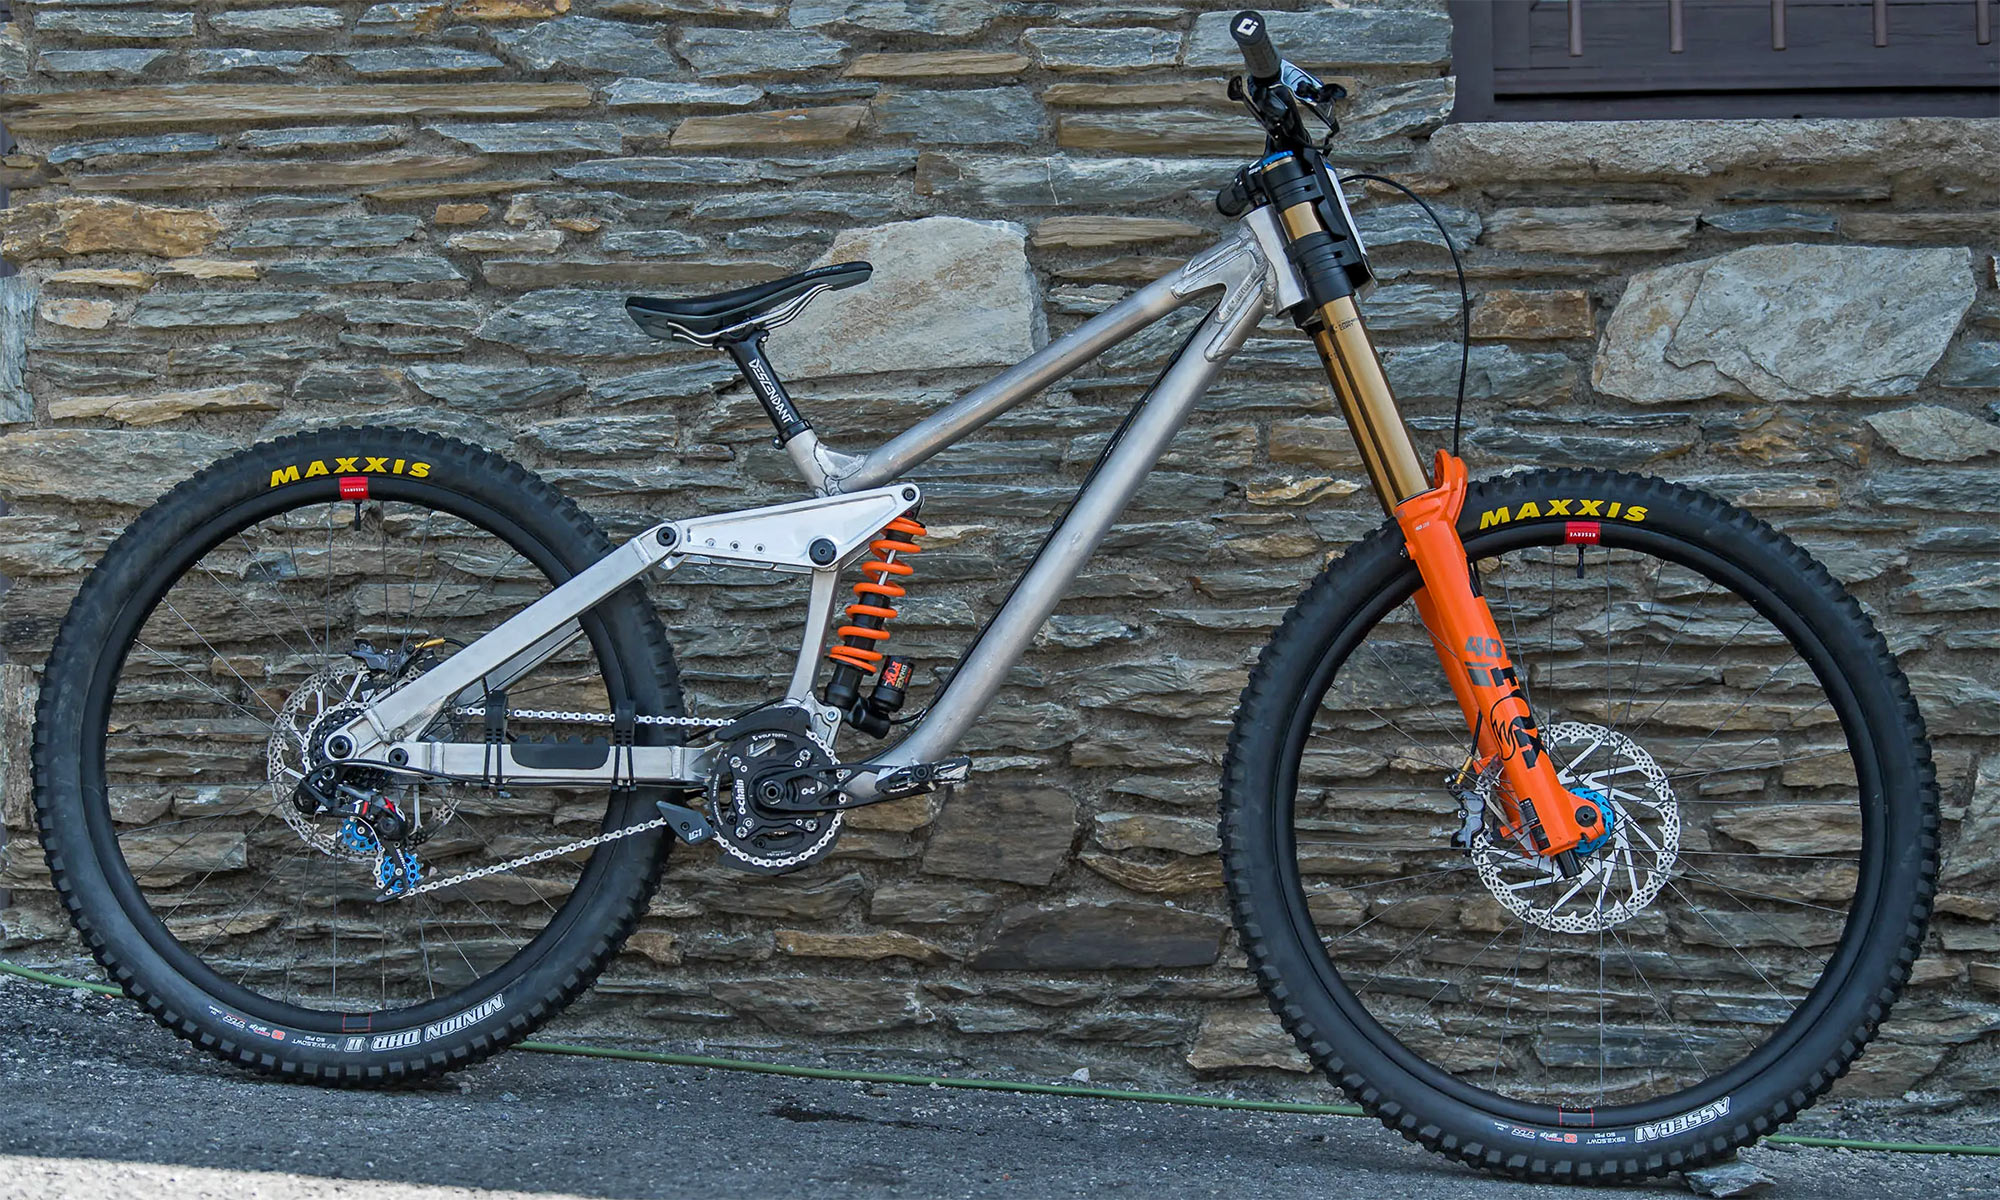 Neko Mulally Frameworks Racing on a Cotic 853 Steel DH bike collaboration prototype